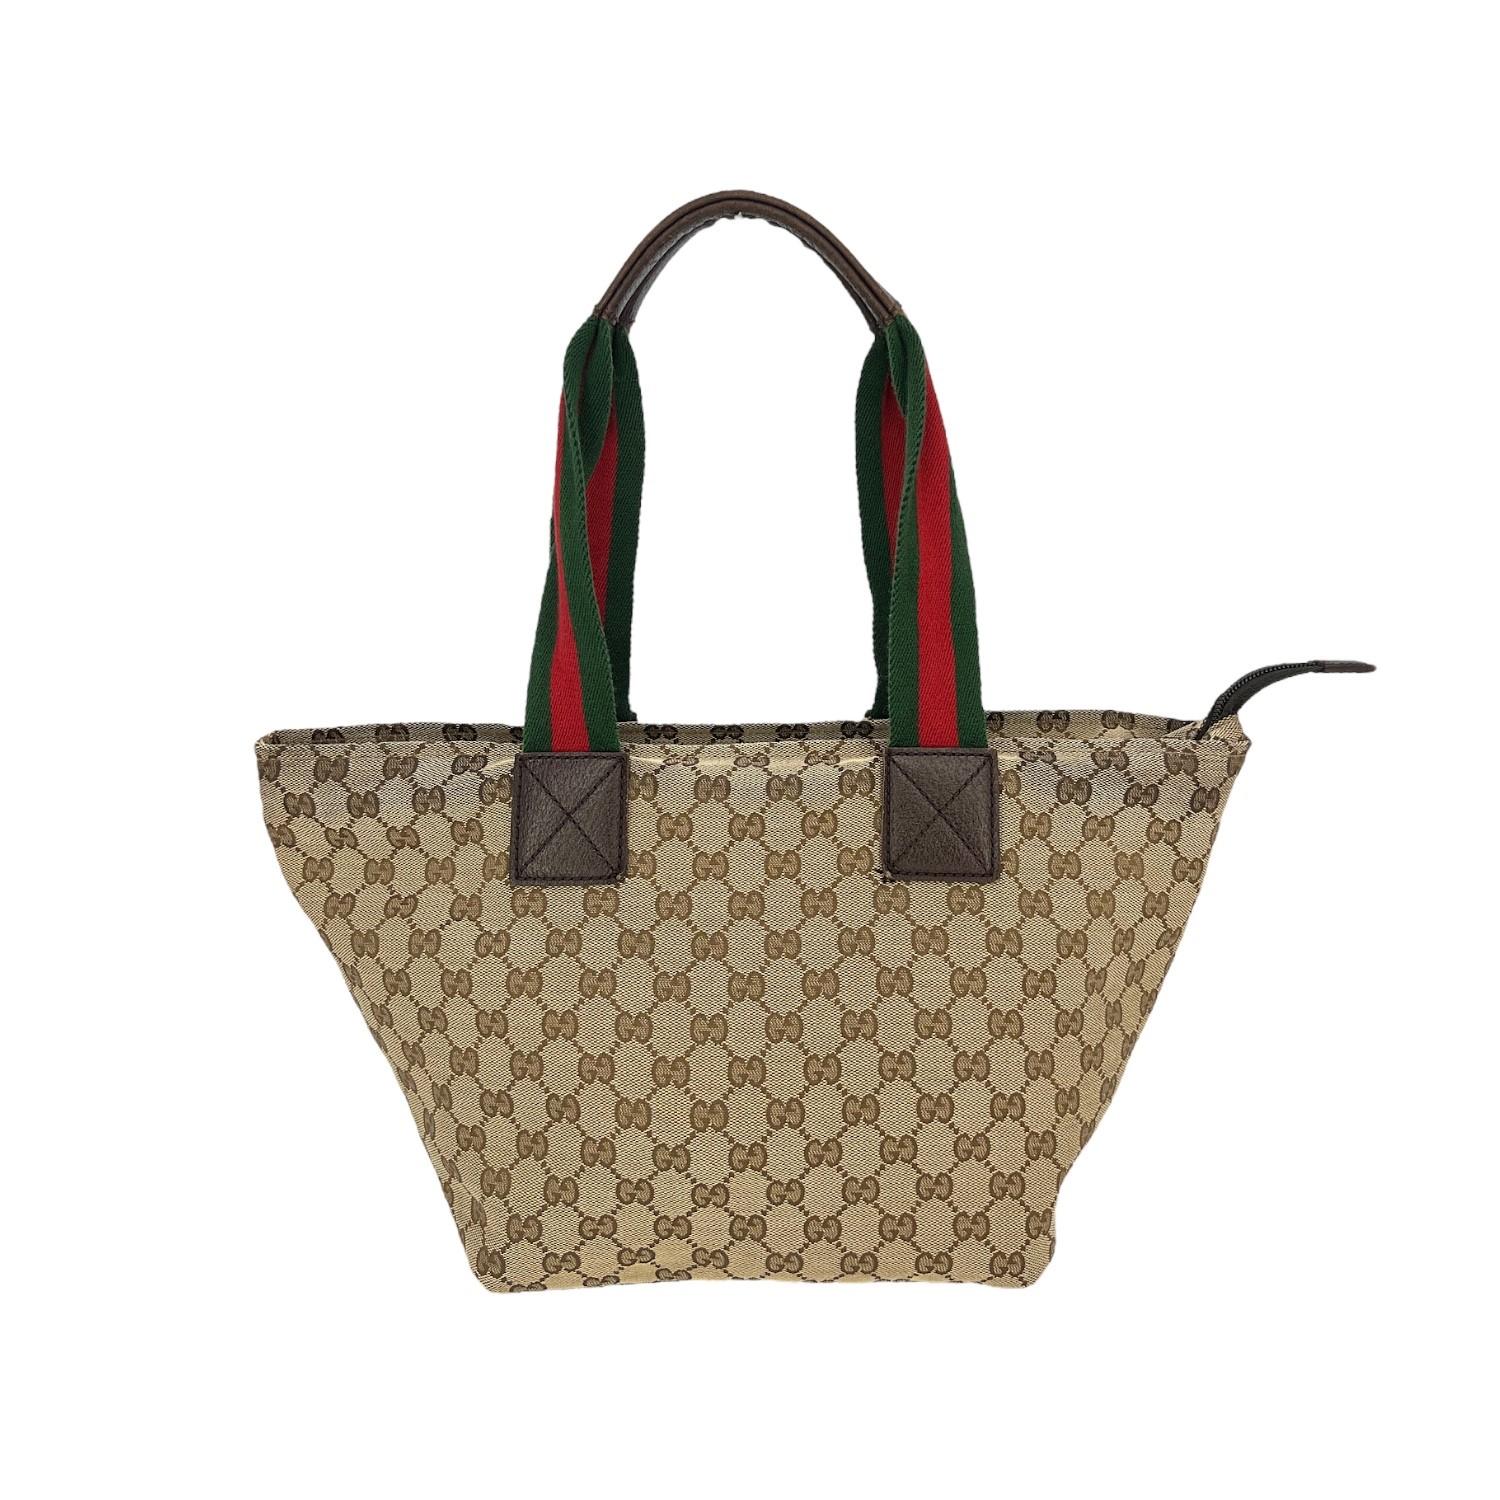 This Gucci GG Canvas Medium Web Tote was made in Italy and it is finely crafted of the classic Gucci GG Monogram canvas with leather trimming. It has dual Gucci Web shoulder straps. It has a zipper closure that opens up to a brown twill interior